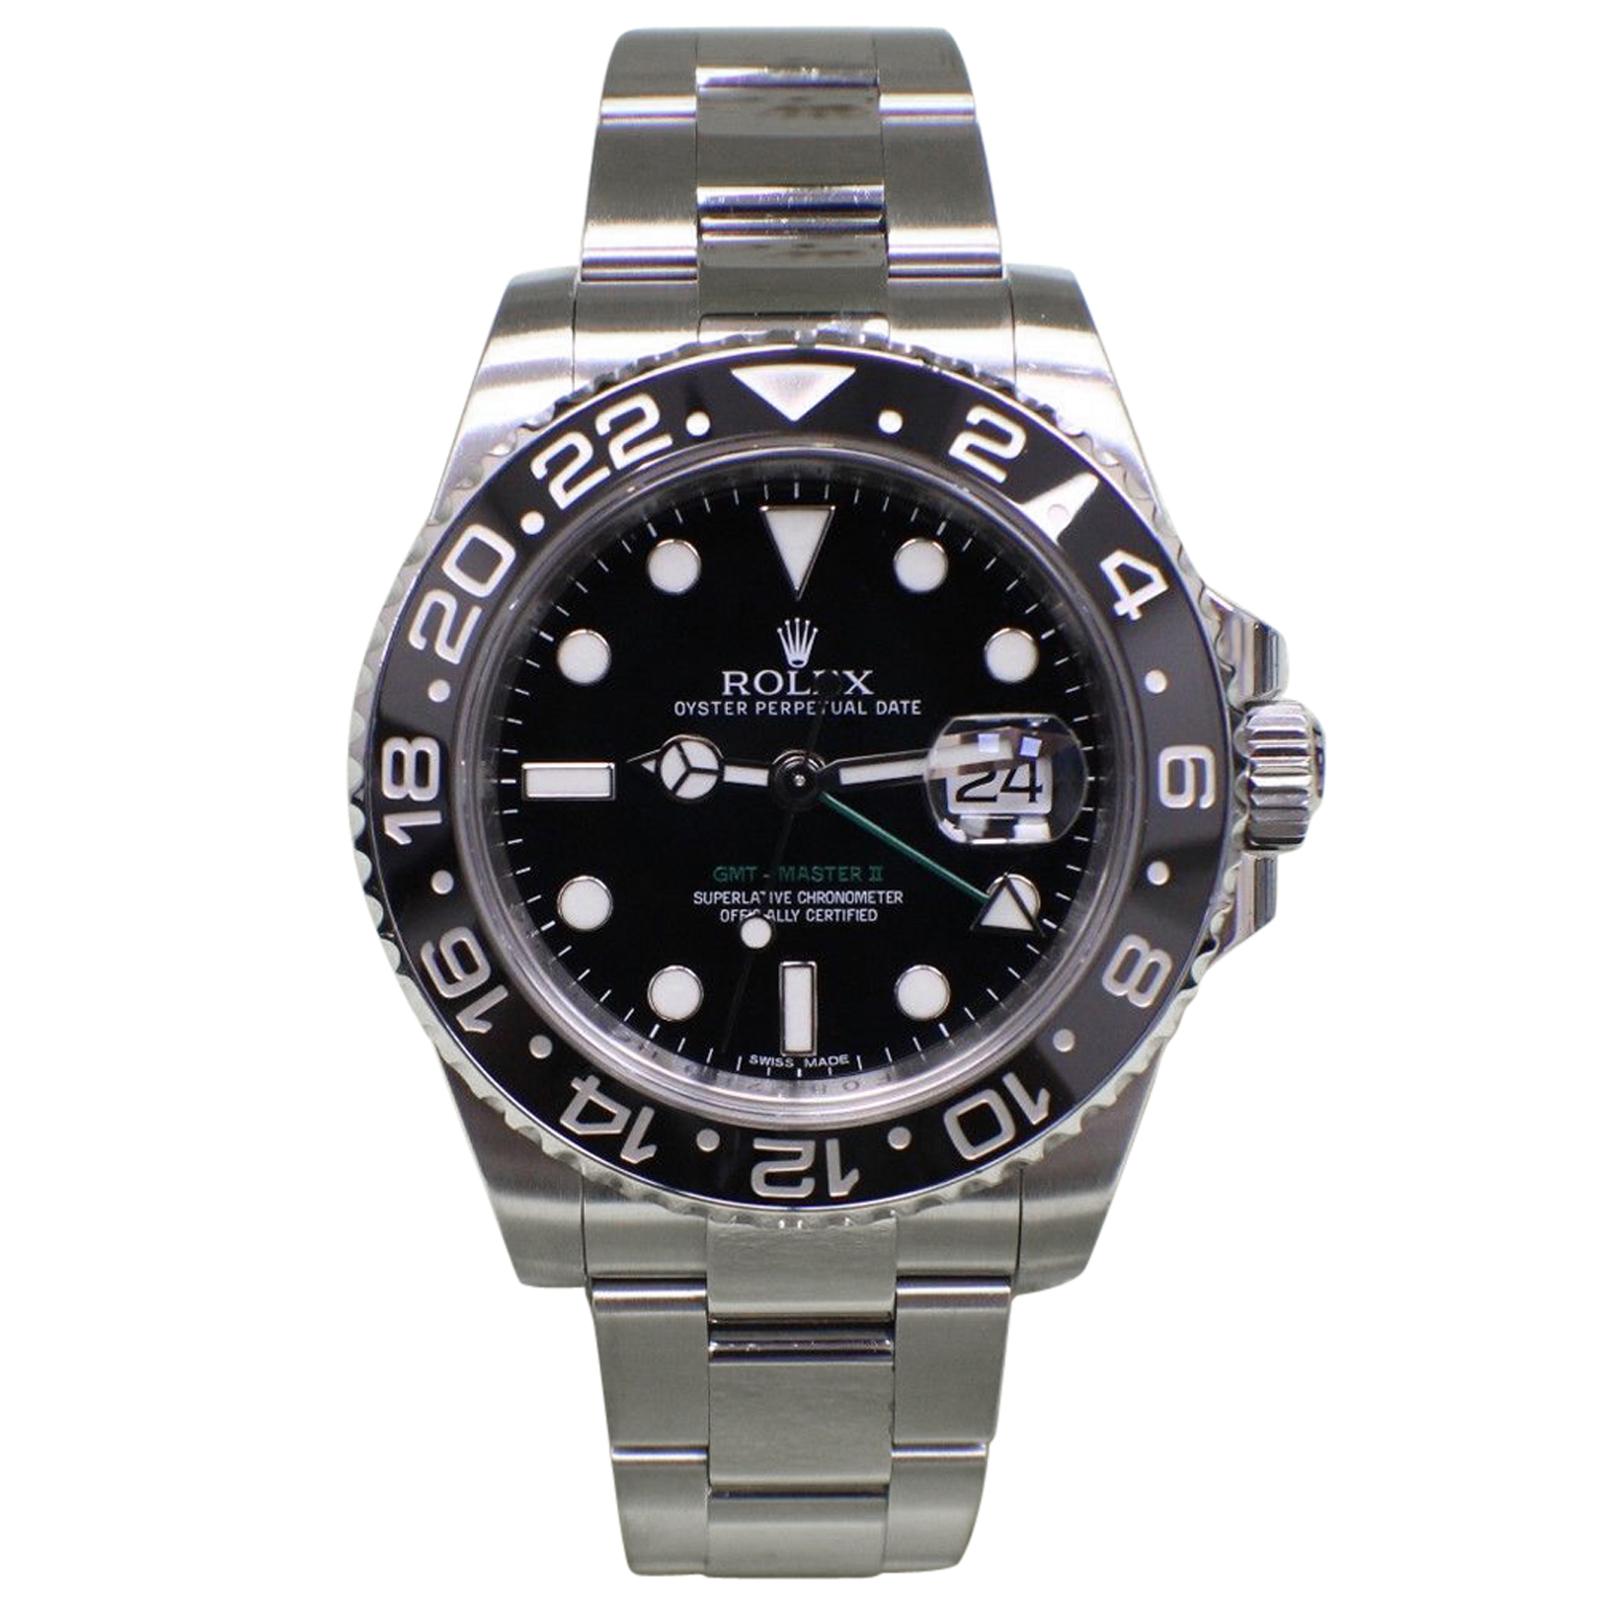 Rolex GMT Master II 116710 Black Ceramic Stainless Steel with Box and Booklets